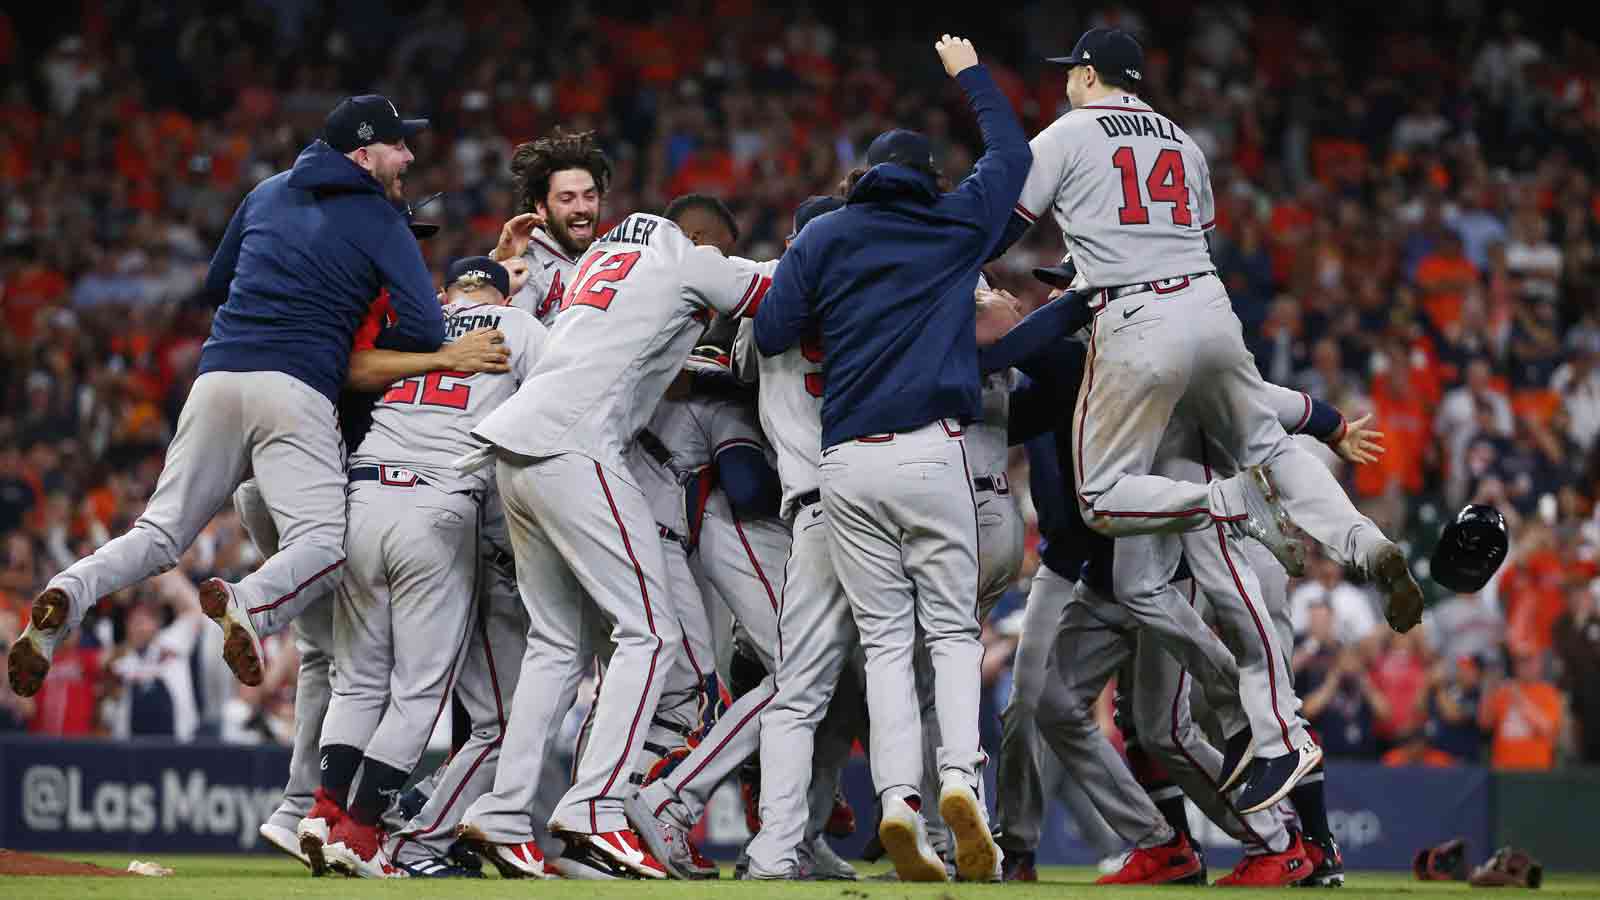 2021 NLCS preview: Atlanta Braves starting pitching and bullpen